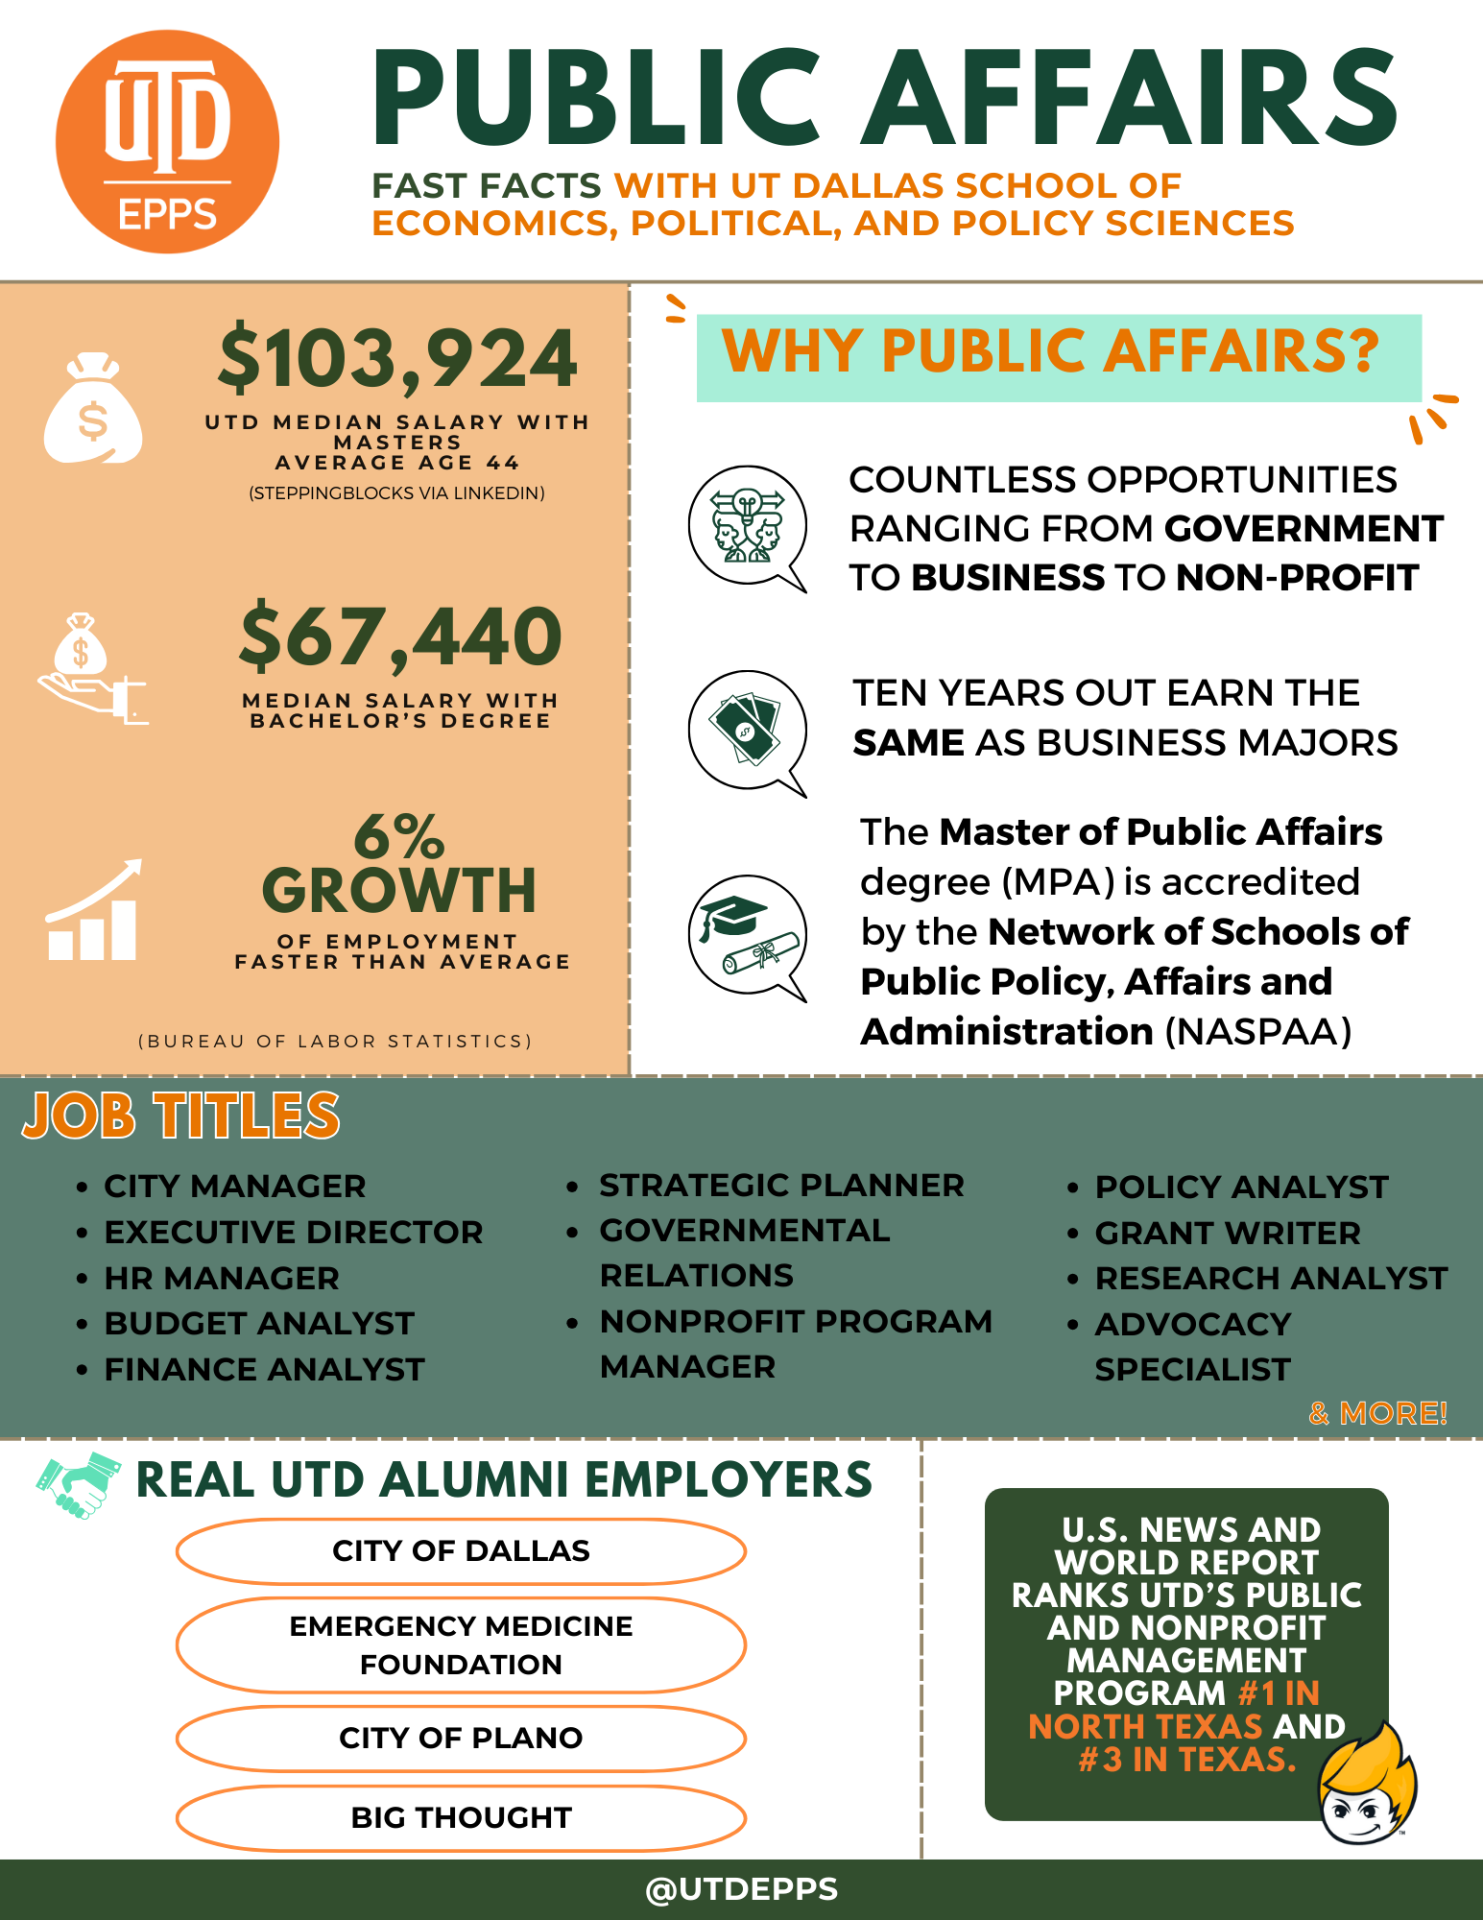 Public Affairs Fast Facts with Ut Dallas school of economics, political, and policy sciences.

3,924 is the UTD Median Salary with masters (Average age 44). Data is from Steppingblocks via Linkedin. ,440 is the Median salary with bachelor’s degree. 6% Growth of employment which is faster than average. Data is from Bureau of Labor Statistics.

WHY public affairs?
COUNTLESS OPPORTUNITIES RANGING FROM GOVERNMENT TO BUSINESS TO NON-PROFIT.
TEN YEARS OUT EARN THE SAME AS BUSINESS MAJORS.
The Master of Public Affairs degree (MPA) is accredited by the Network of Schools of Public Policy, Affairs and Administration (NASPAA)

Job titles include:
CITY MANAGER
EXECUTIVE DIRECTOR 
HR MANAGER
BUDGET ANALYST
FINANCE ANALYST
STRATEGIC PLANNER
GOVERNMENTAL RELATIONS
NONPROFIT PROGRAM MANAGER
POLICY ANALYST
GRANT WRITER
RESEARCH ANALYST
ADVOCACY SPECIALIST
& MORE!

Real utd alumni employers include:
CITY OF PLANO
CITY OF DALLAS
EMERGENCY MEDICINE FOUNDATION
BIG THOUGHT

U.S. NEWS AND WORLD REPORT RANKS UTD’S PUBLIC AND NONPROFIT MANAGEMENT PROGRAM #1 IN NORTH TEXAS AND #3 IN TEXAS.

@UTDEPPS